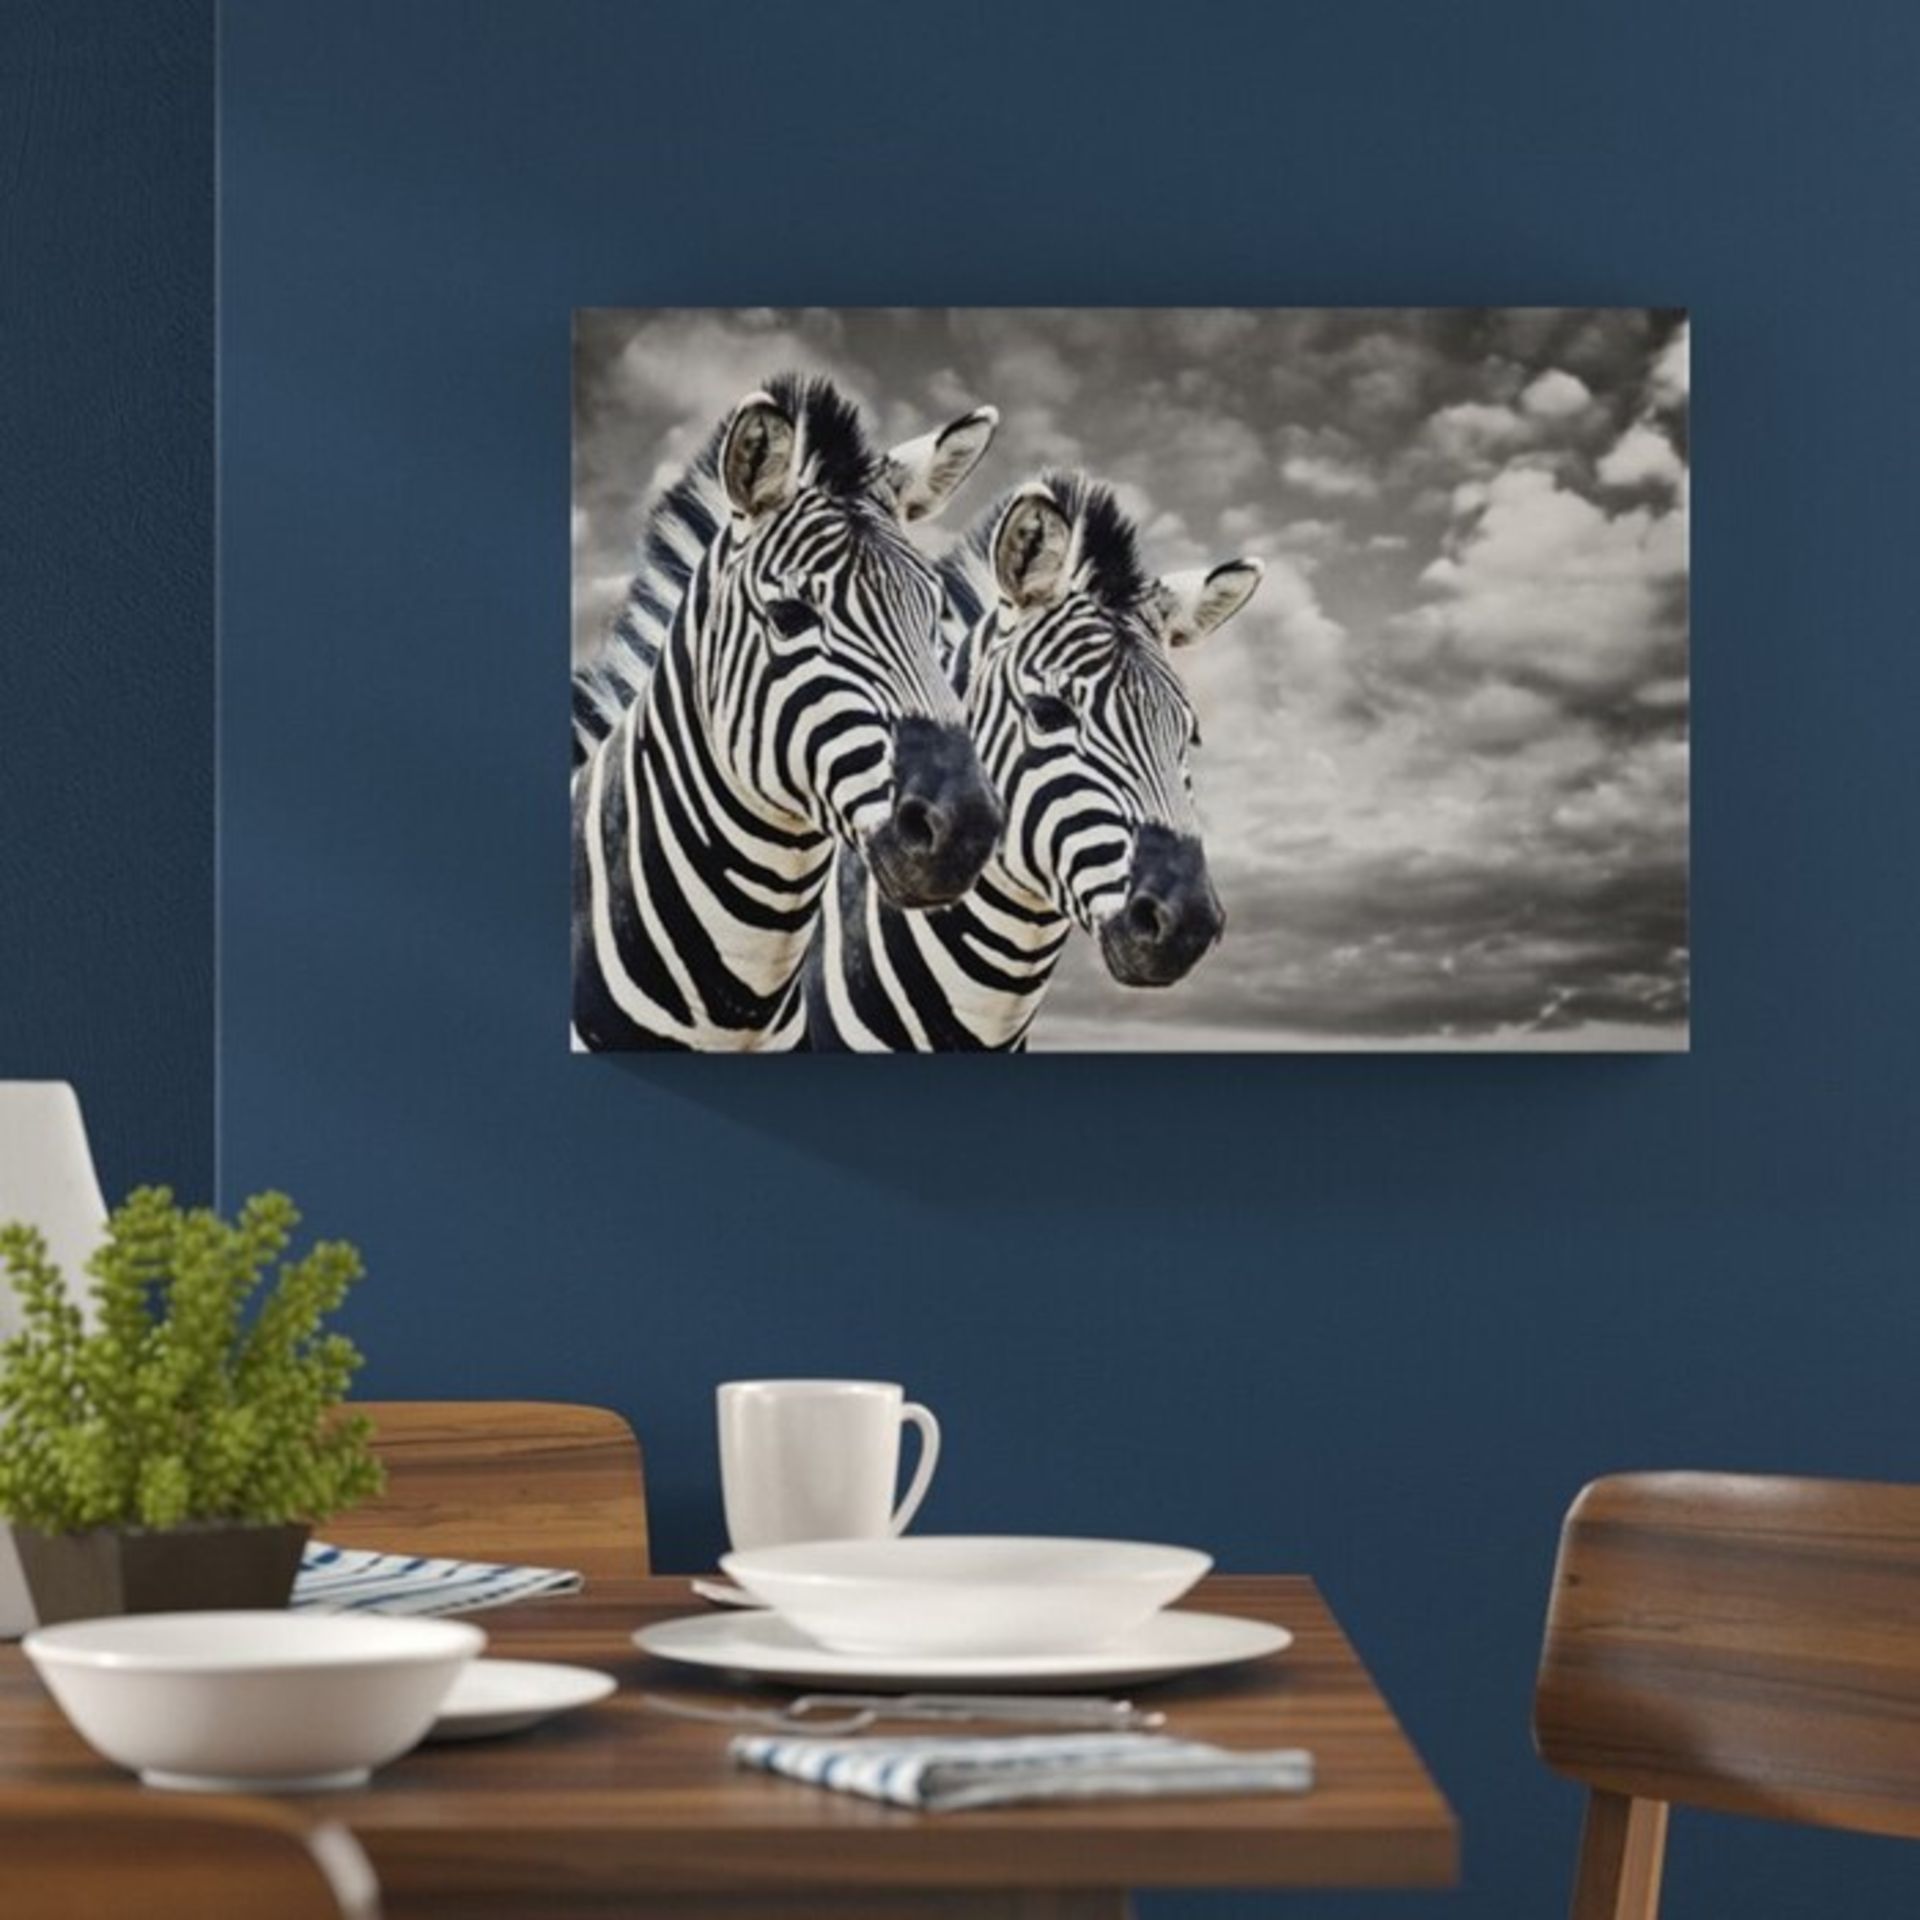 East Urban Home, Two Zebras Graphic Print on Canvas (40X60CM) - RRP £33.99 (EXXP2732 - 18012/17) 2G